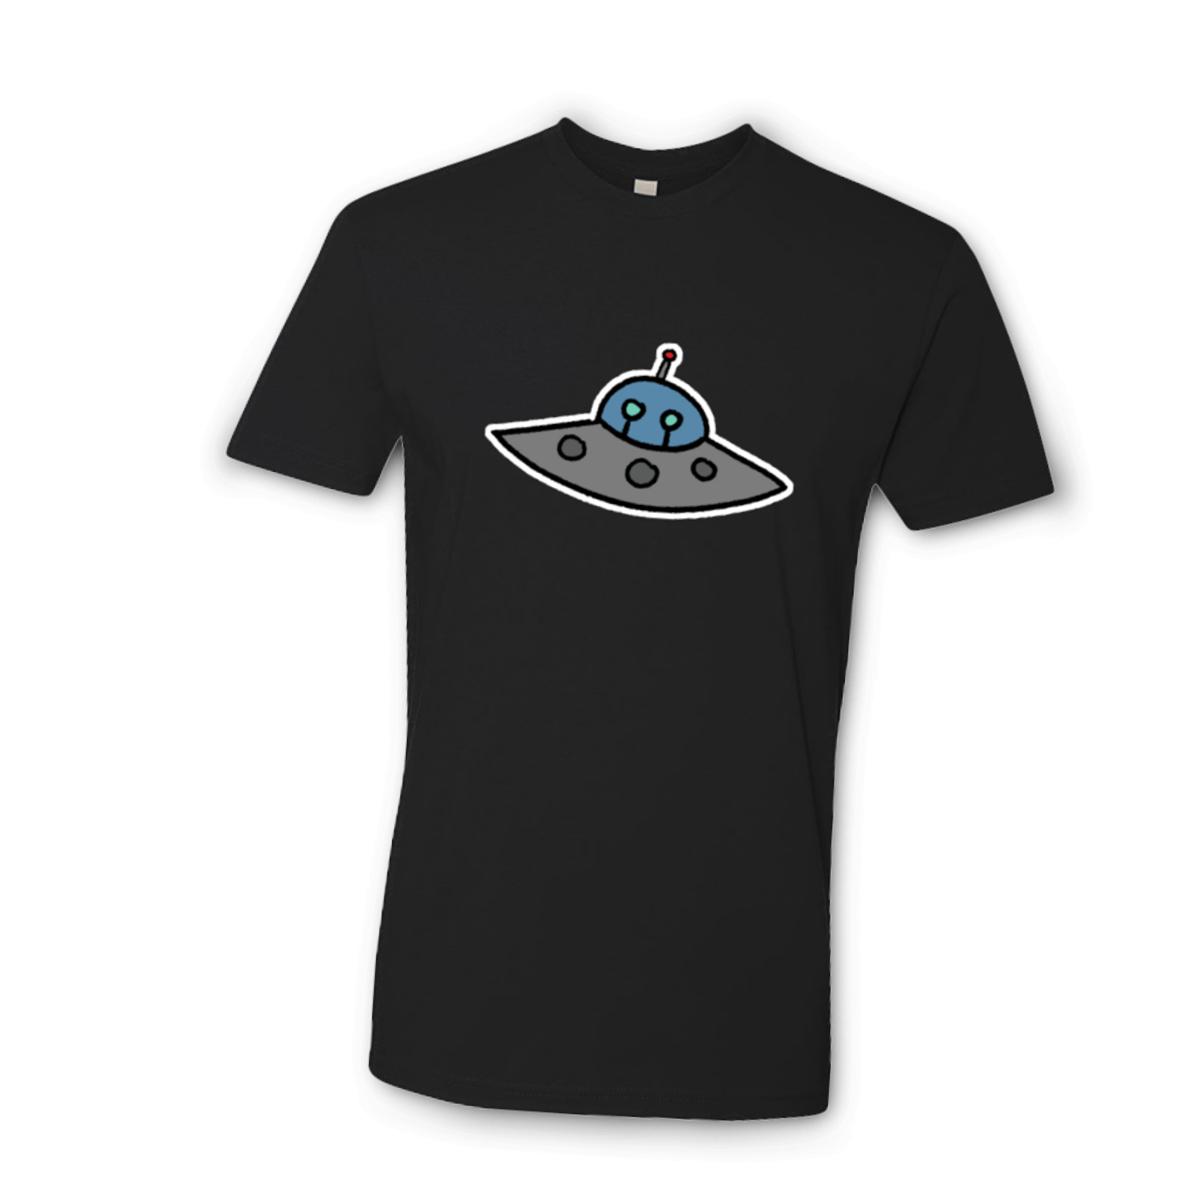 Flying Saucer Unisex Tee Small black